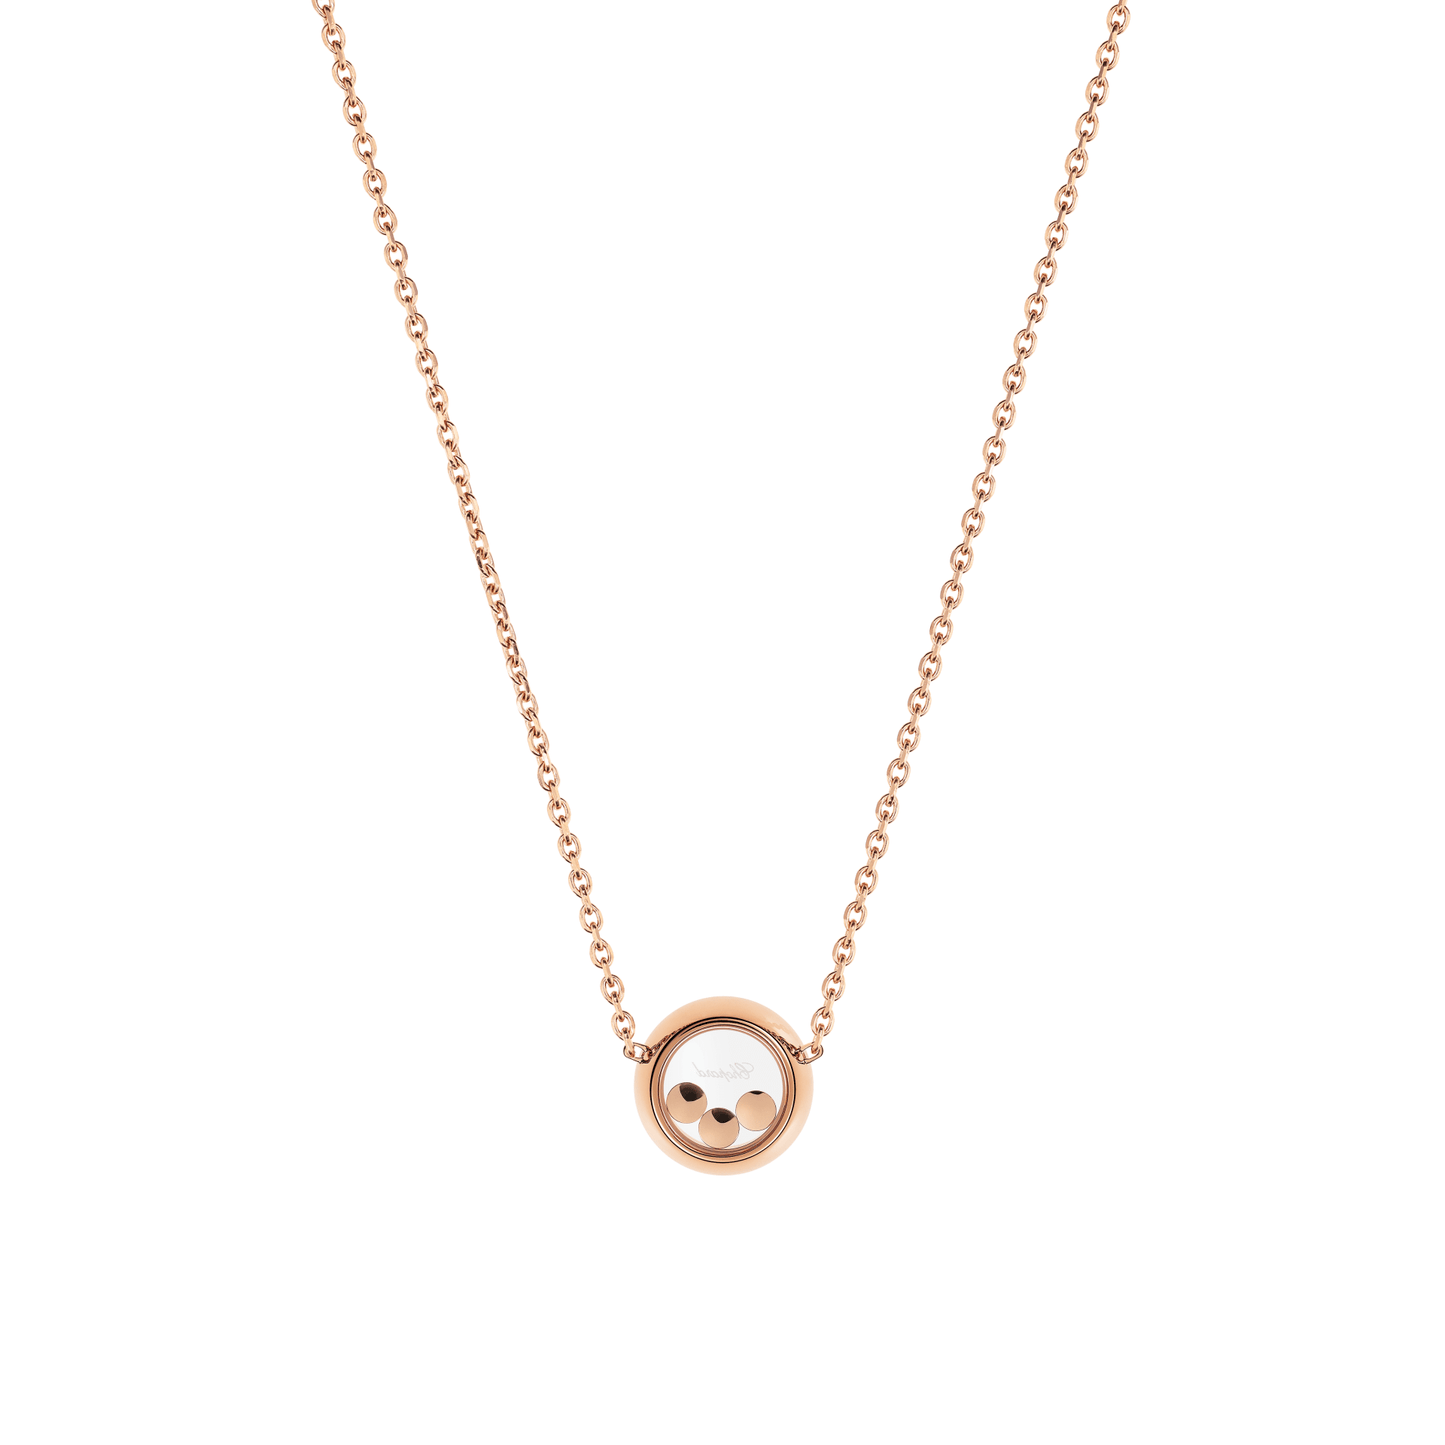 HAPPY DIAMONDS ICONS NECKLACE, ETHICAL ROSE GOLD, DIAMONDS 81A018-5001